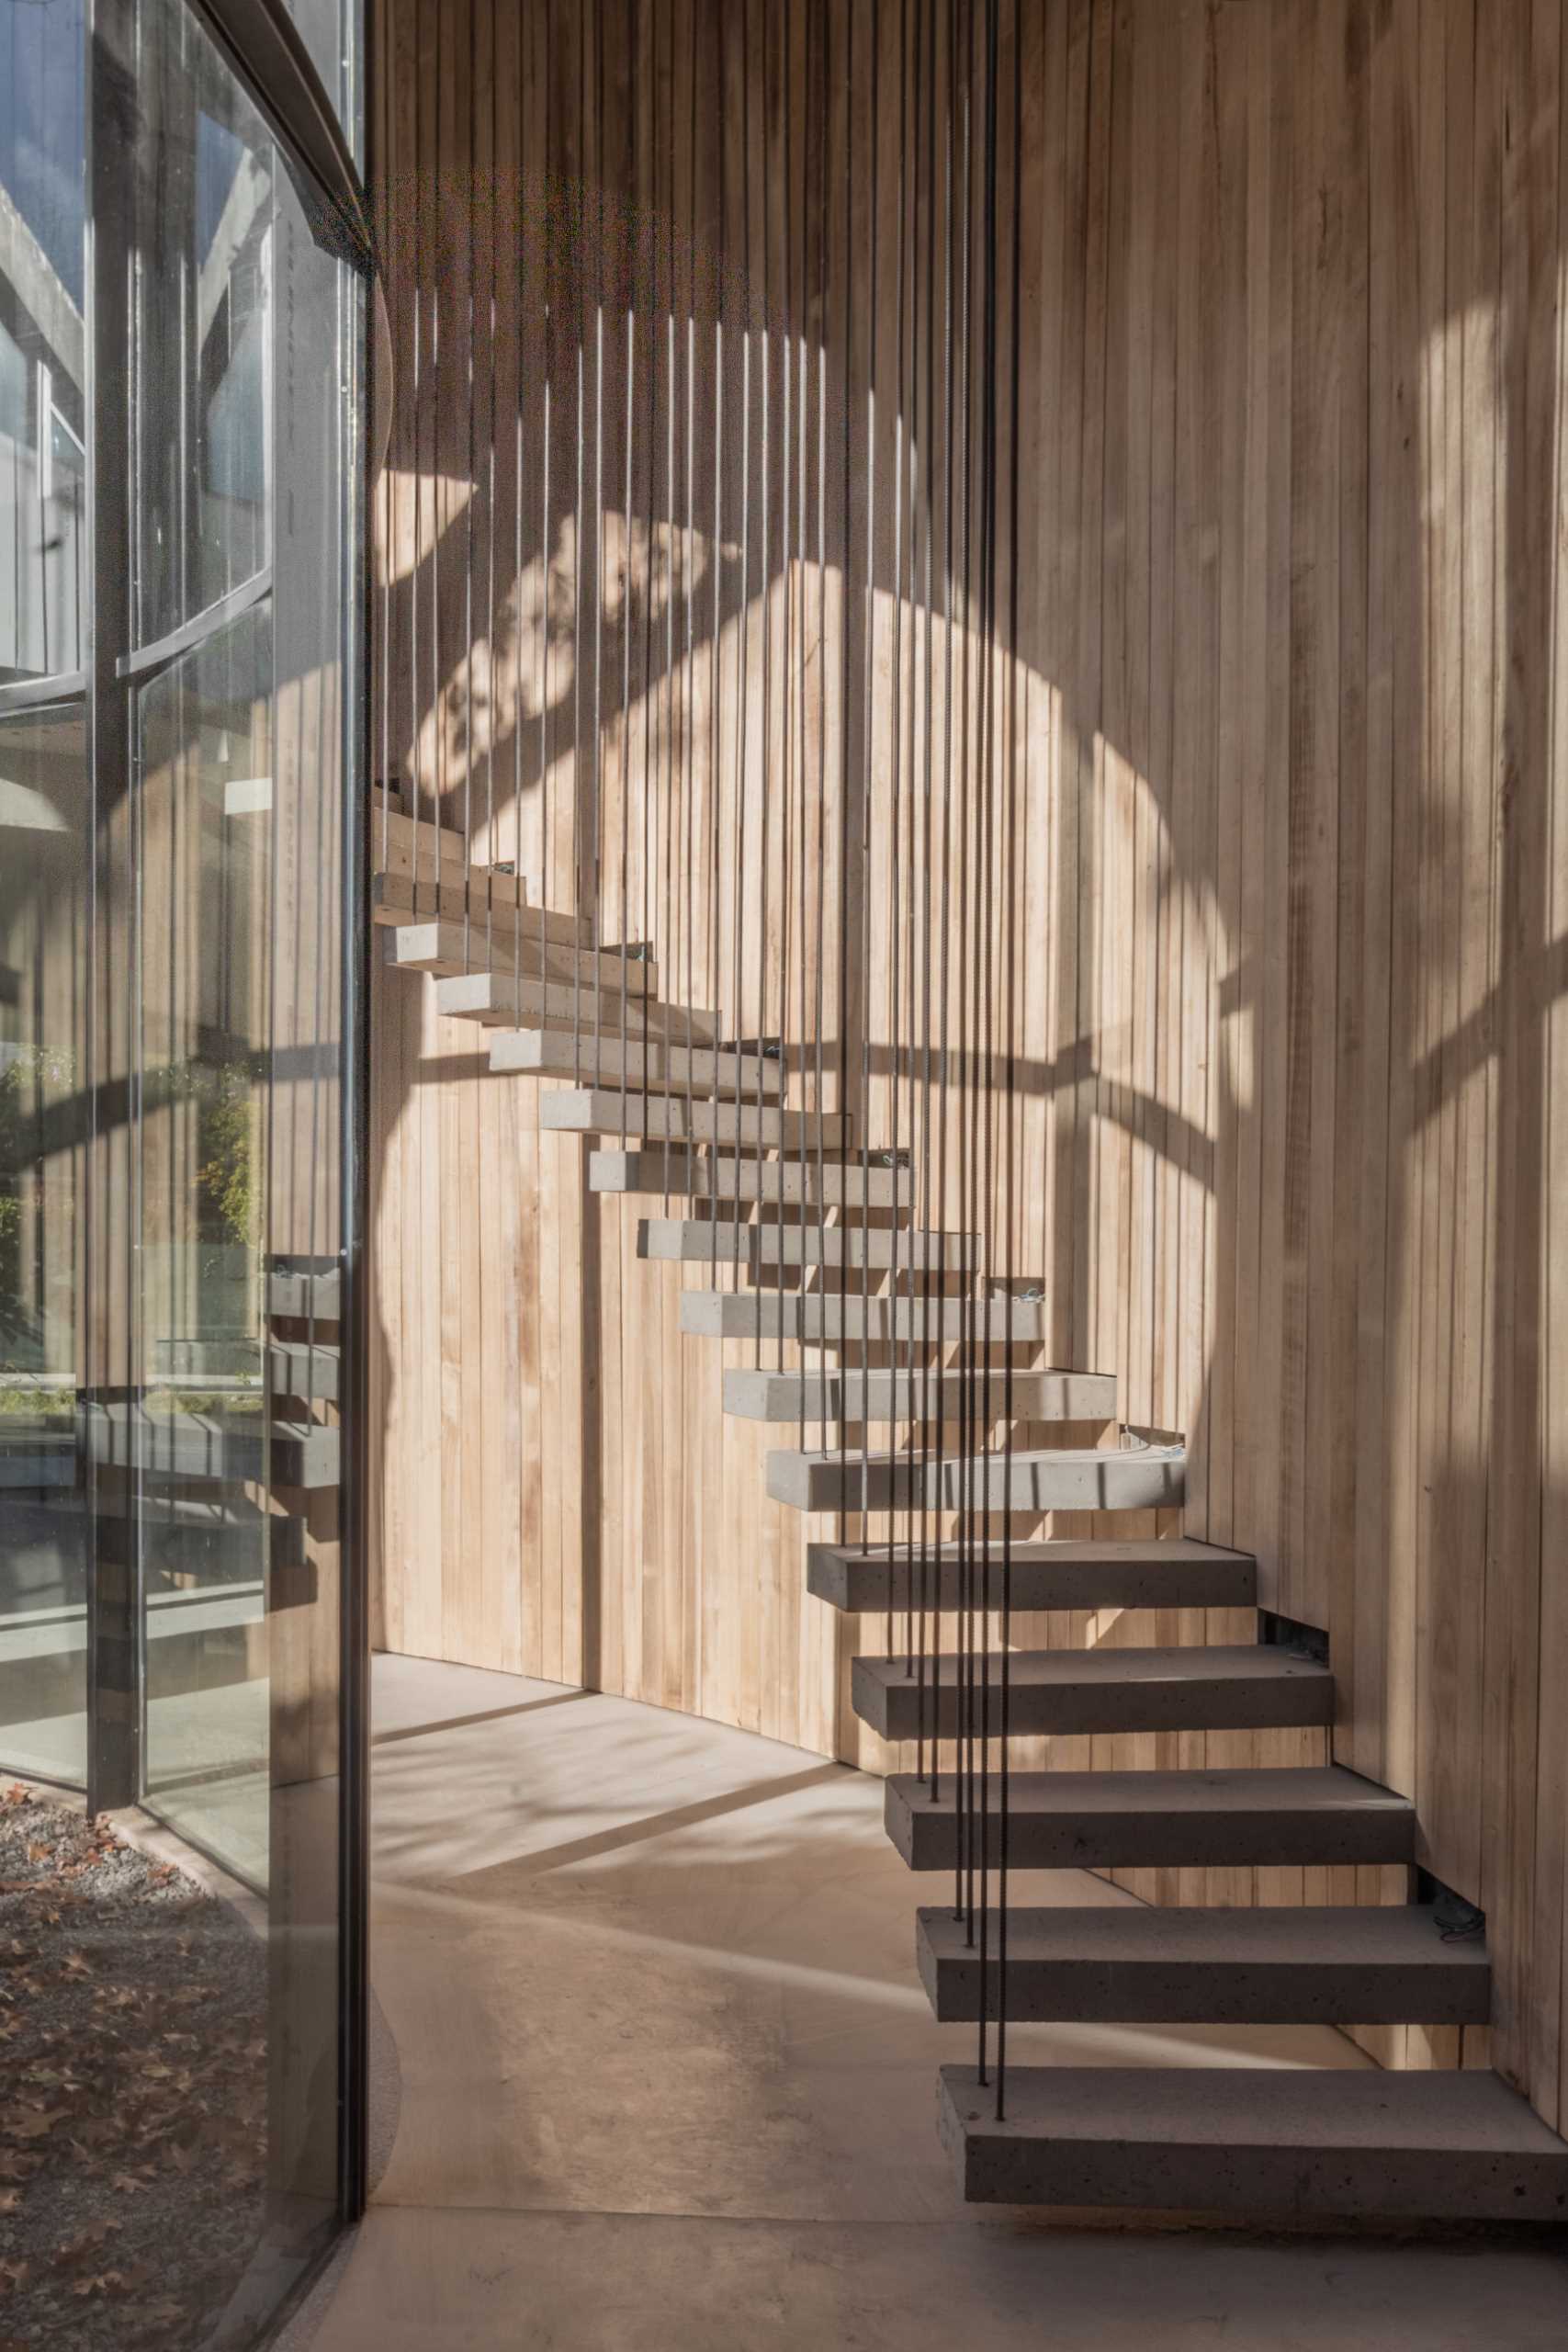 The wall of curving windows fills the space with an abundance of natural light, while the stairs double as a sculptural element that follows the curve.